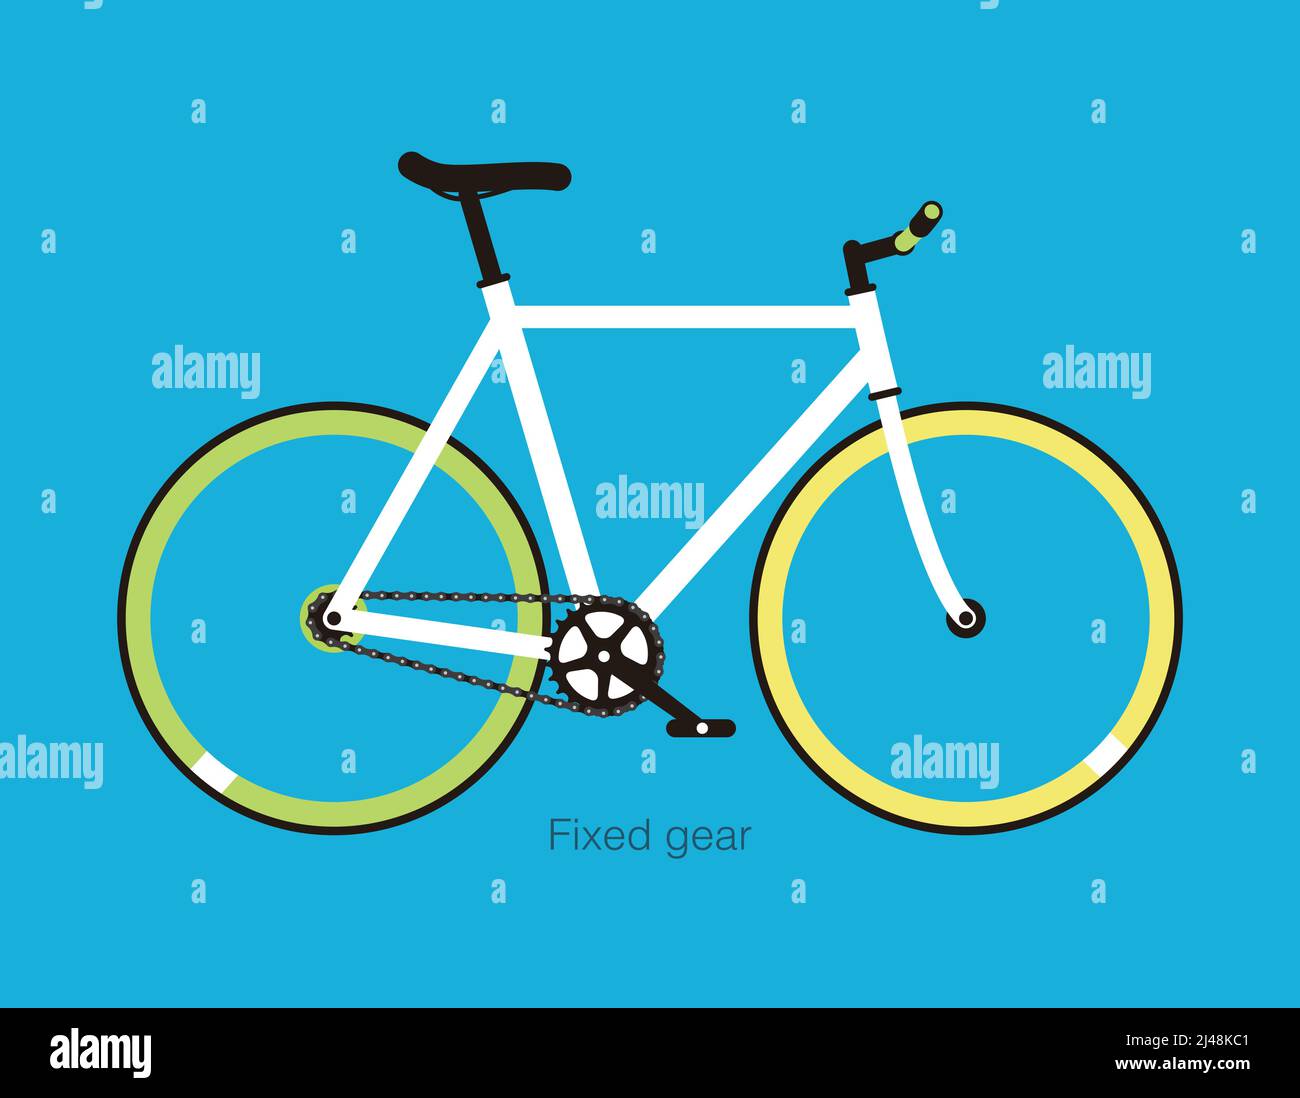 Simple flat fixed-gear bicycle vector illustration Stock Vector